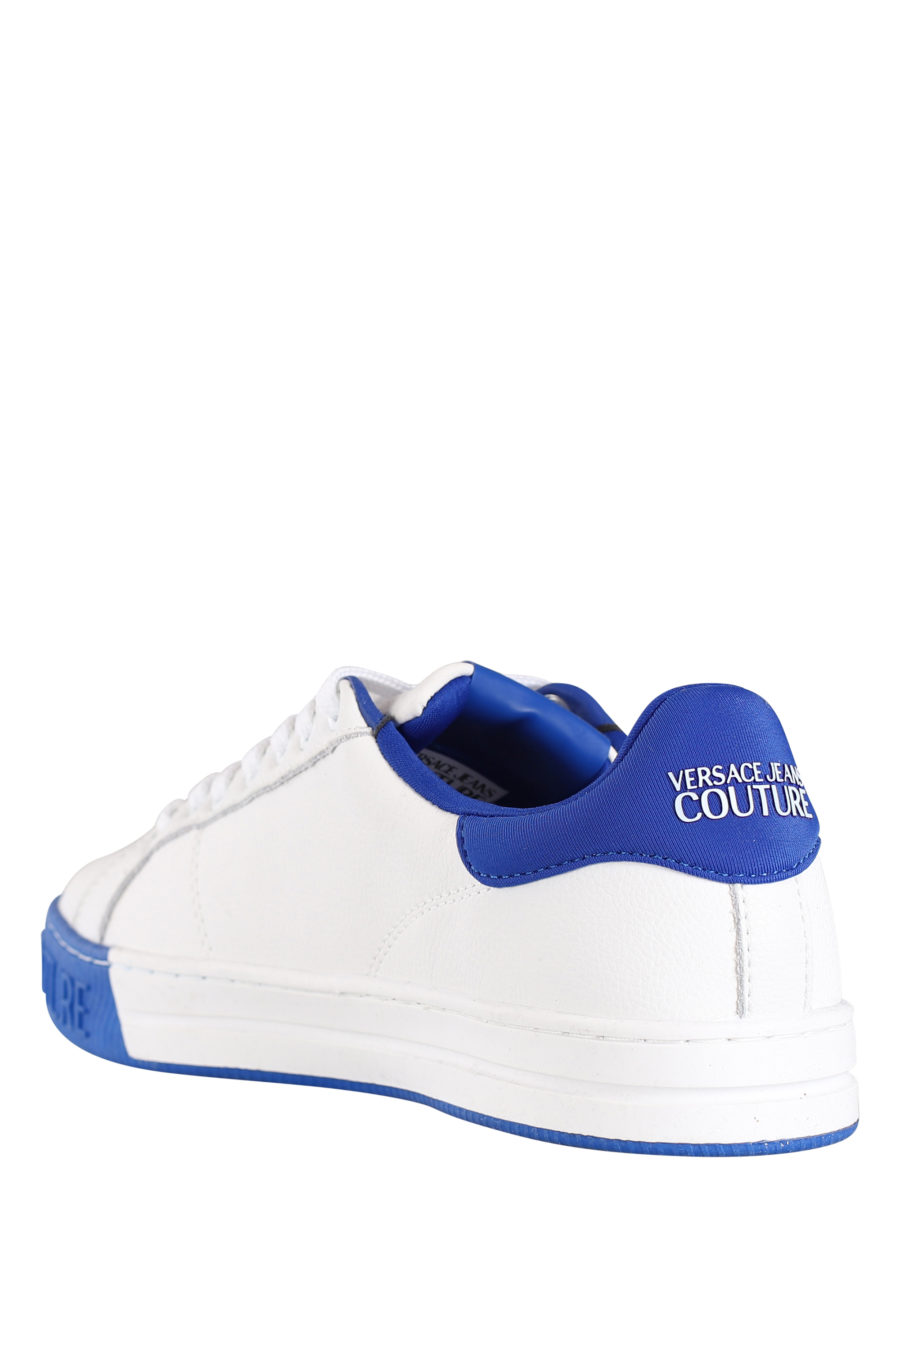 White trainers with blue details - IMG 9802